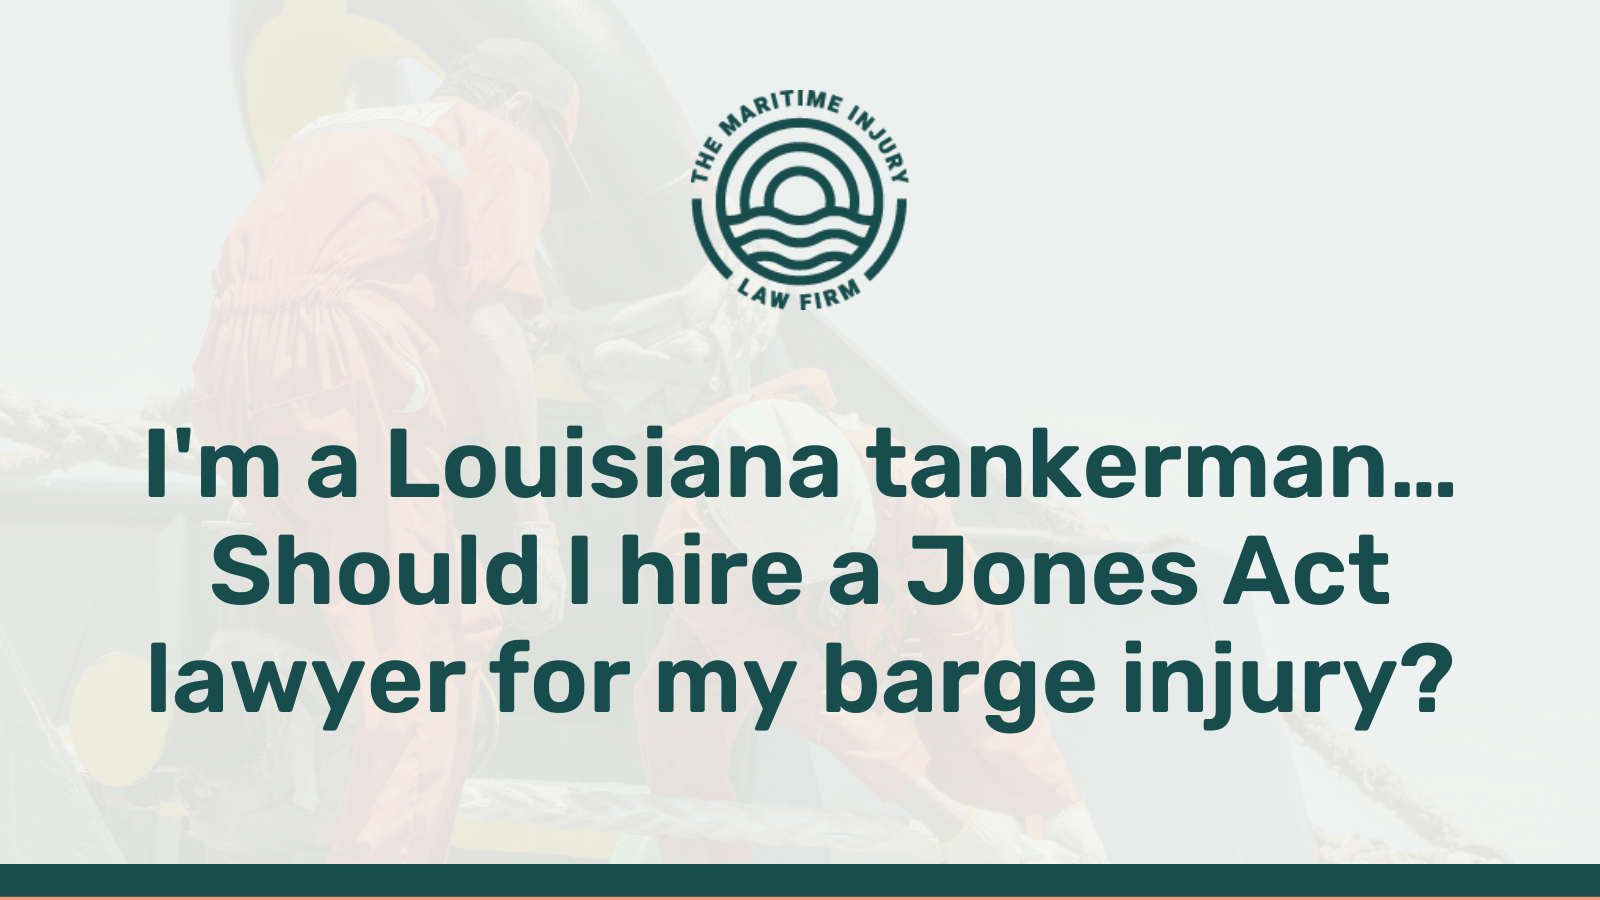 I'm a Louisiana tankerman… Should I hire a Jones Act lawyer for my barge injury- maritime injury law firm - George Vourvoulias